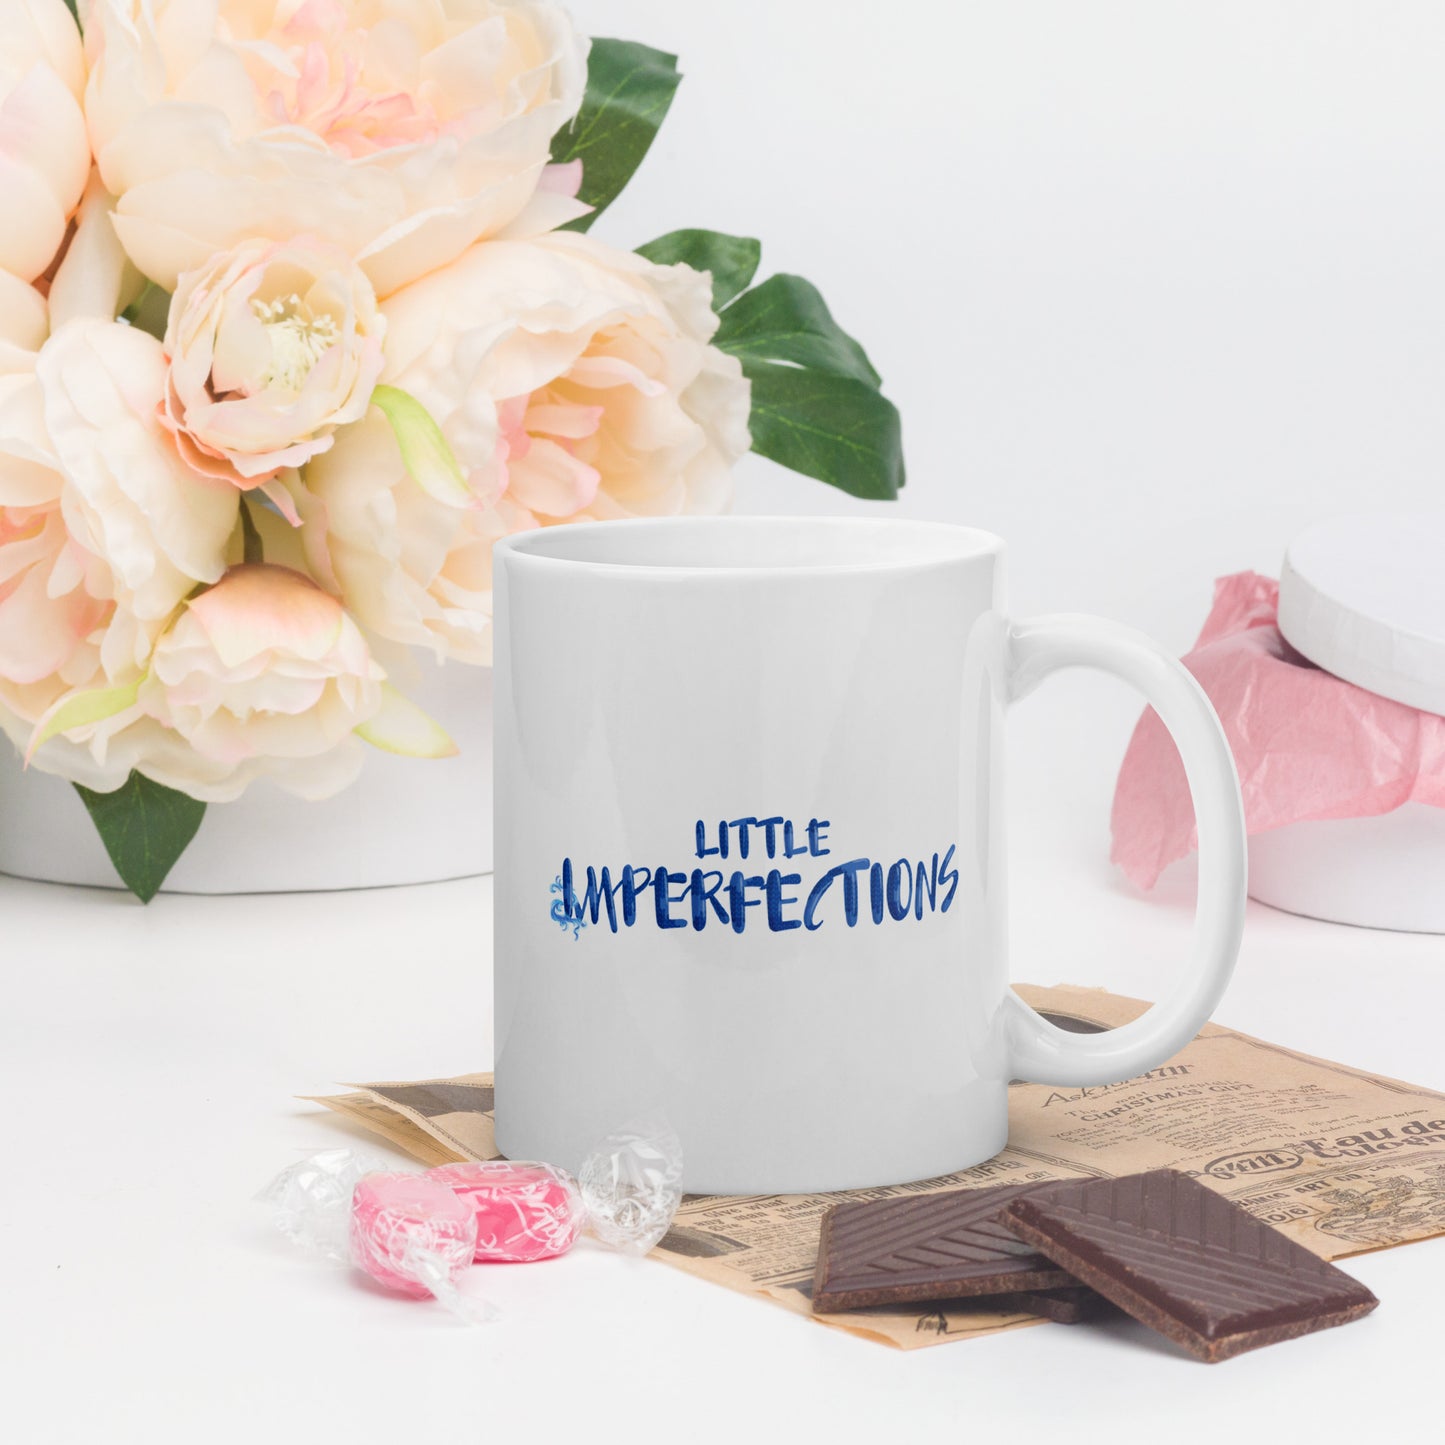 "The Montzingo Mug" from Little Imperfections